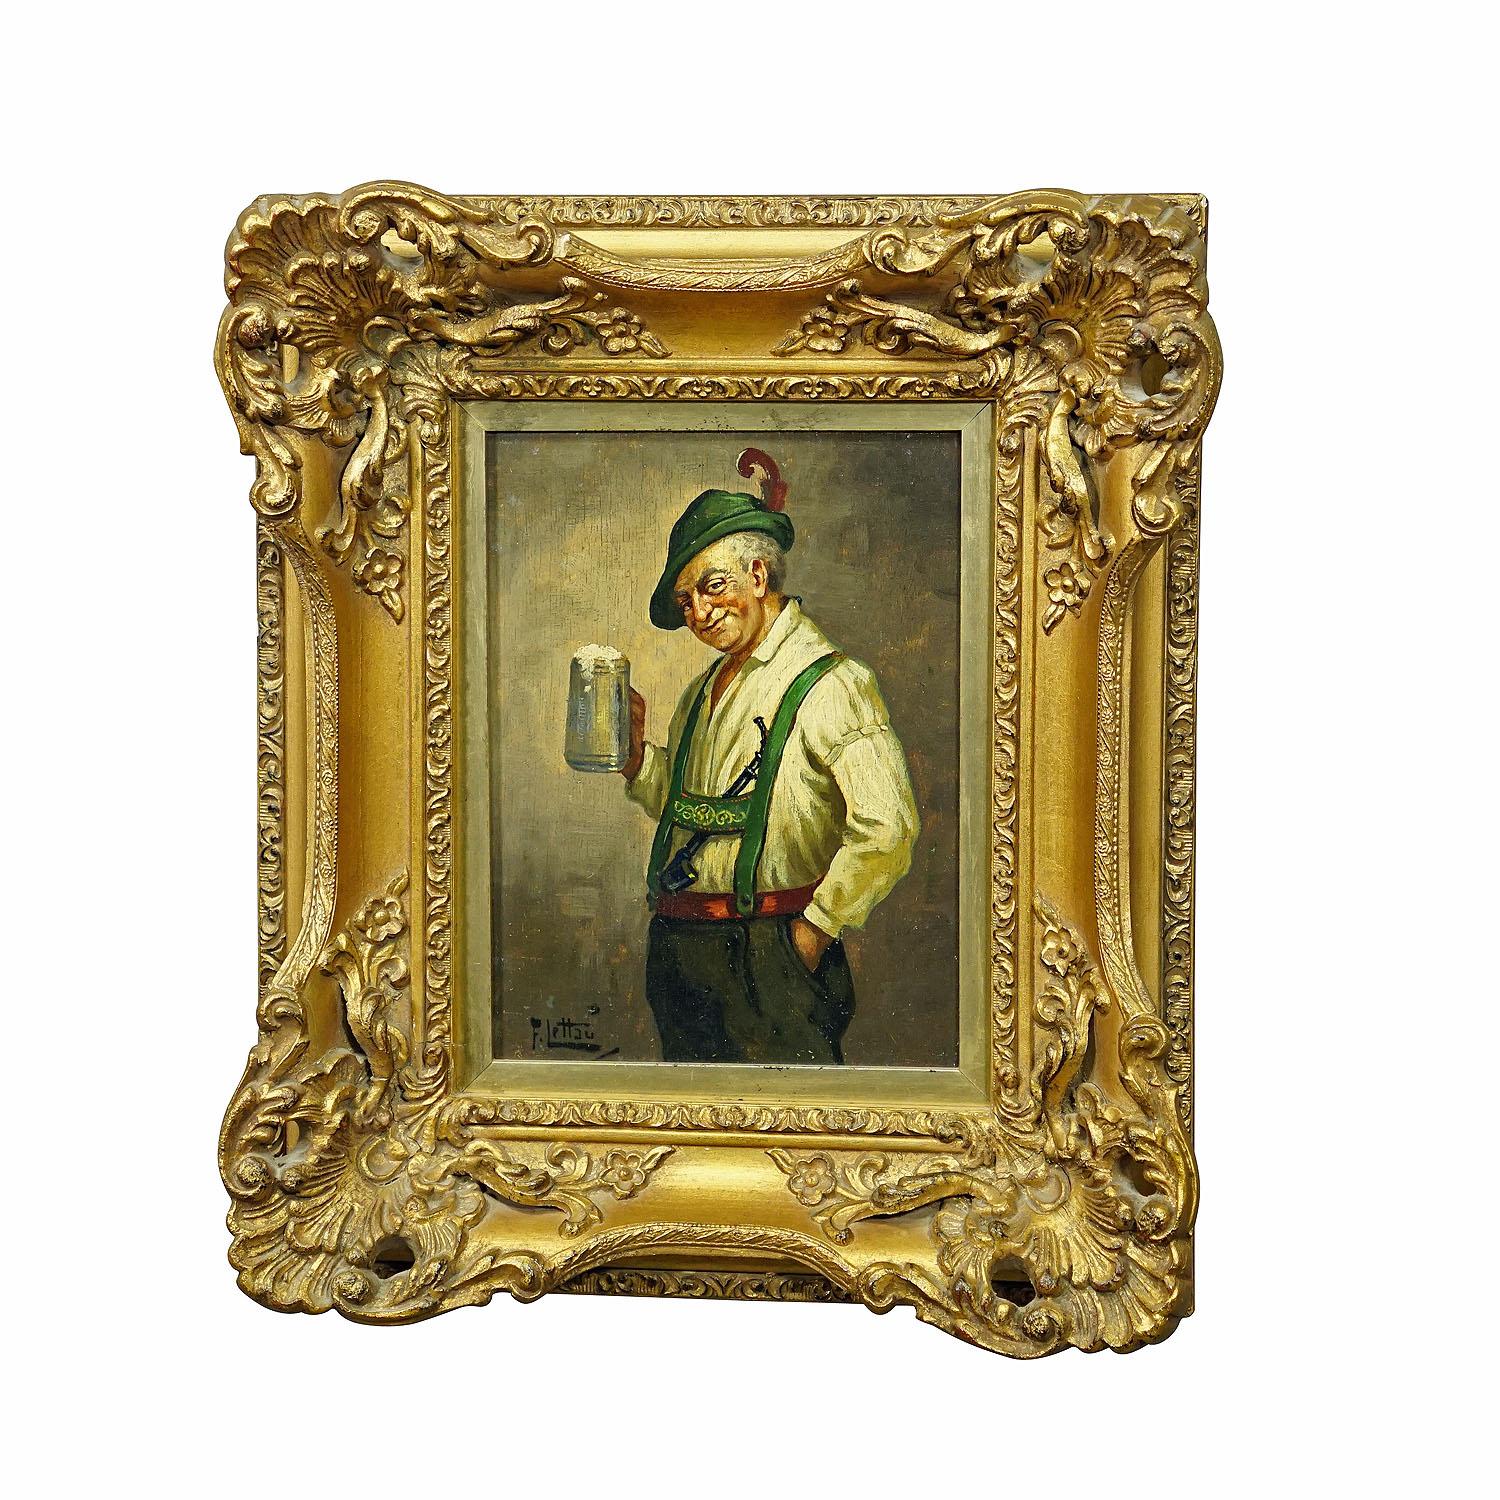 Friedrich Lettau - Bavarian folksy man with beer mug, oil on wood ca. 1950s

An colorful oil painting depicting a folksy Bavarian man in his costume trinking beer. Painted on wood with pastell colors around 1950s. Framed with antique wooden gilded